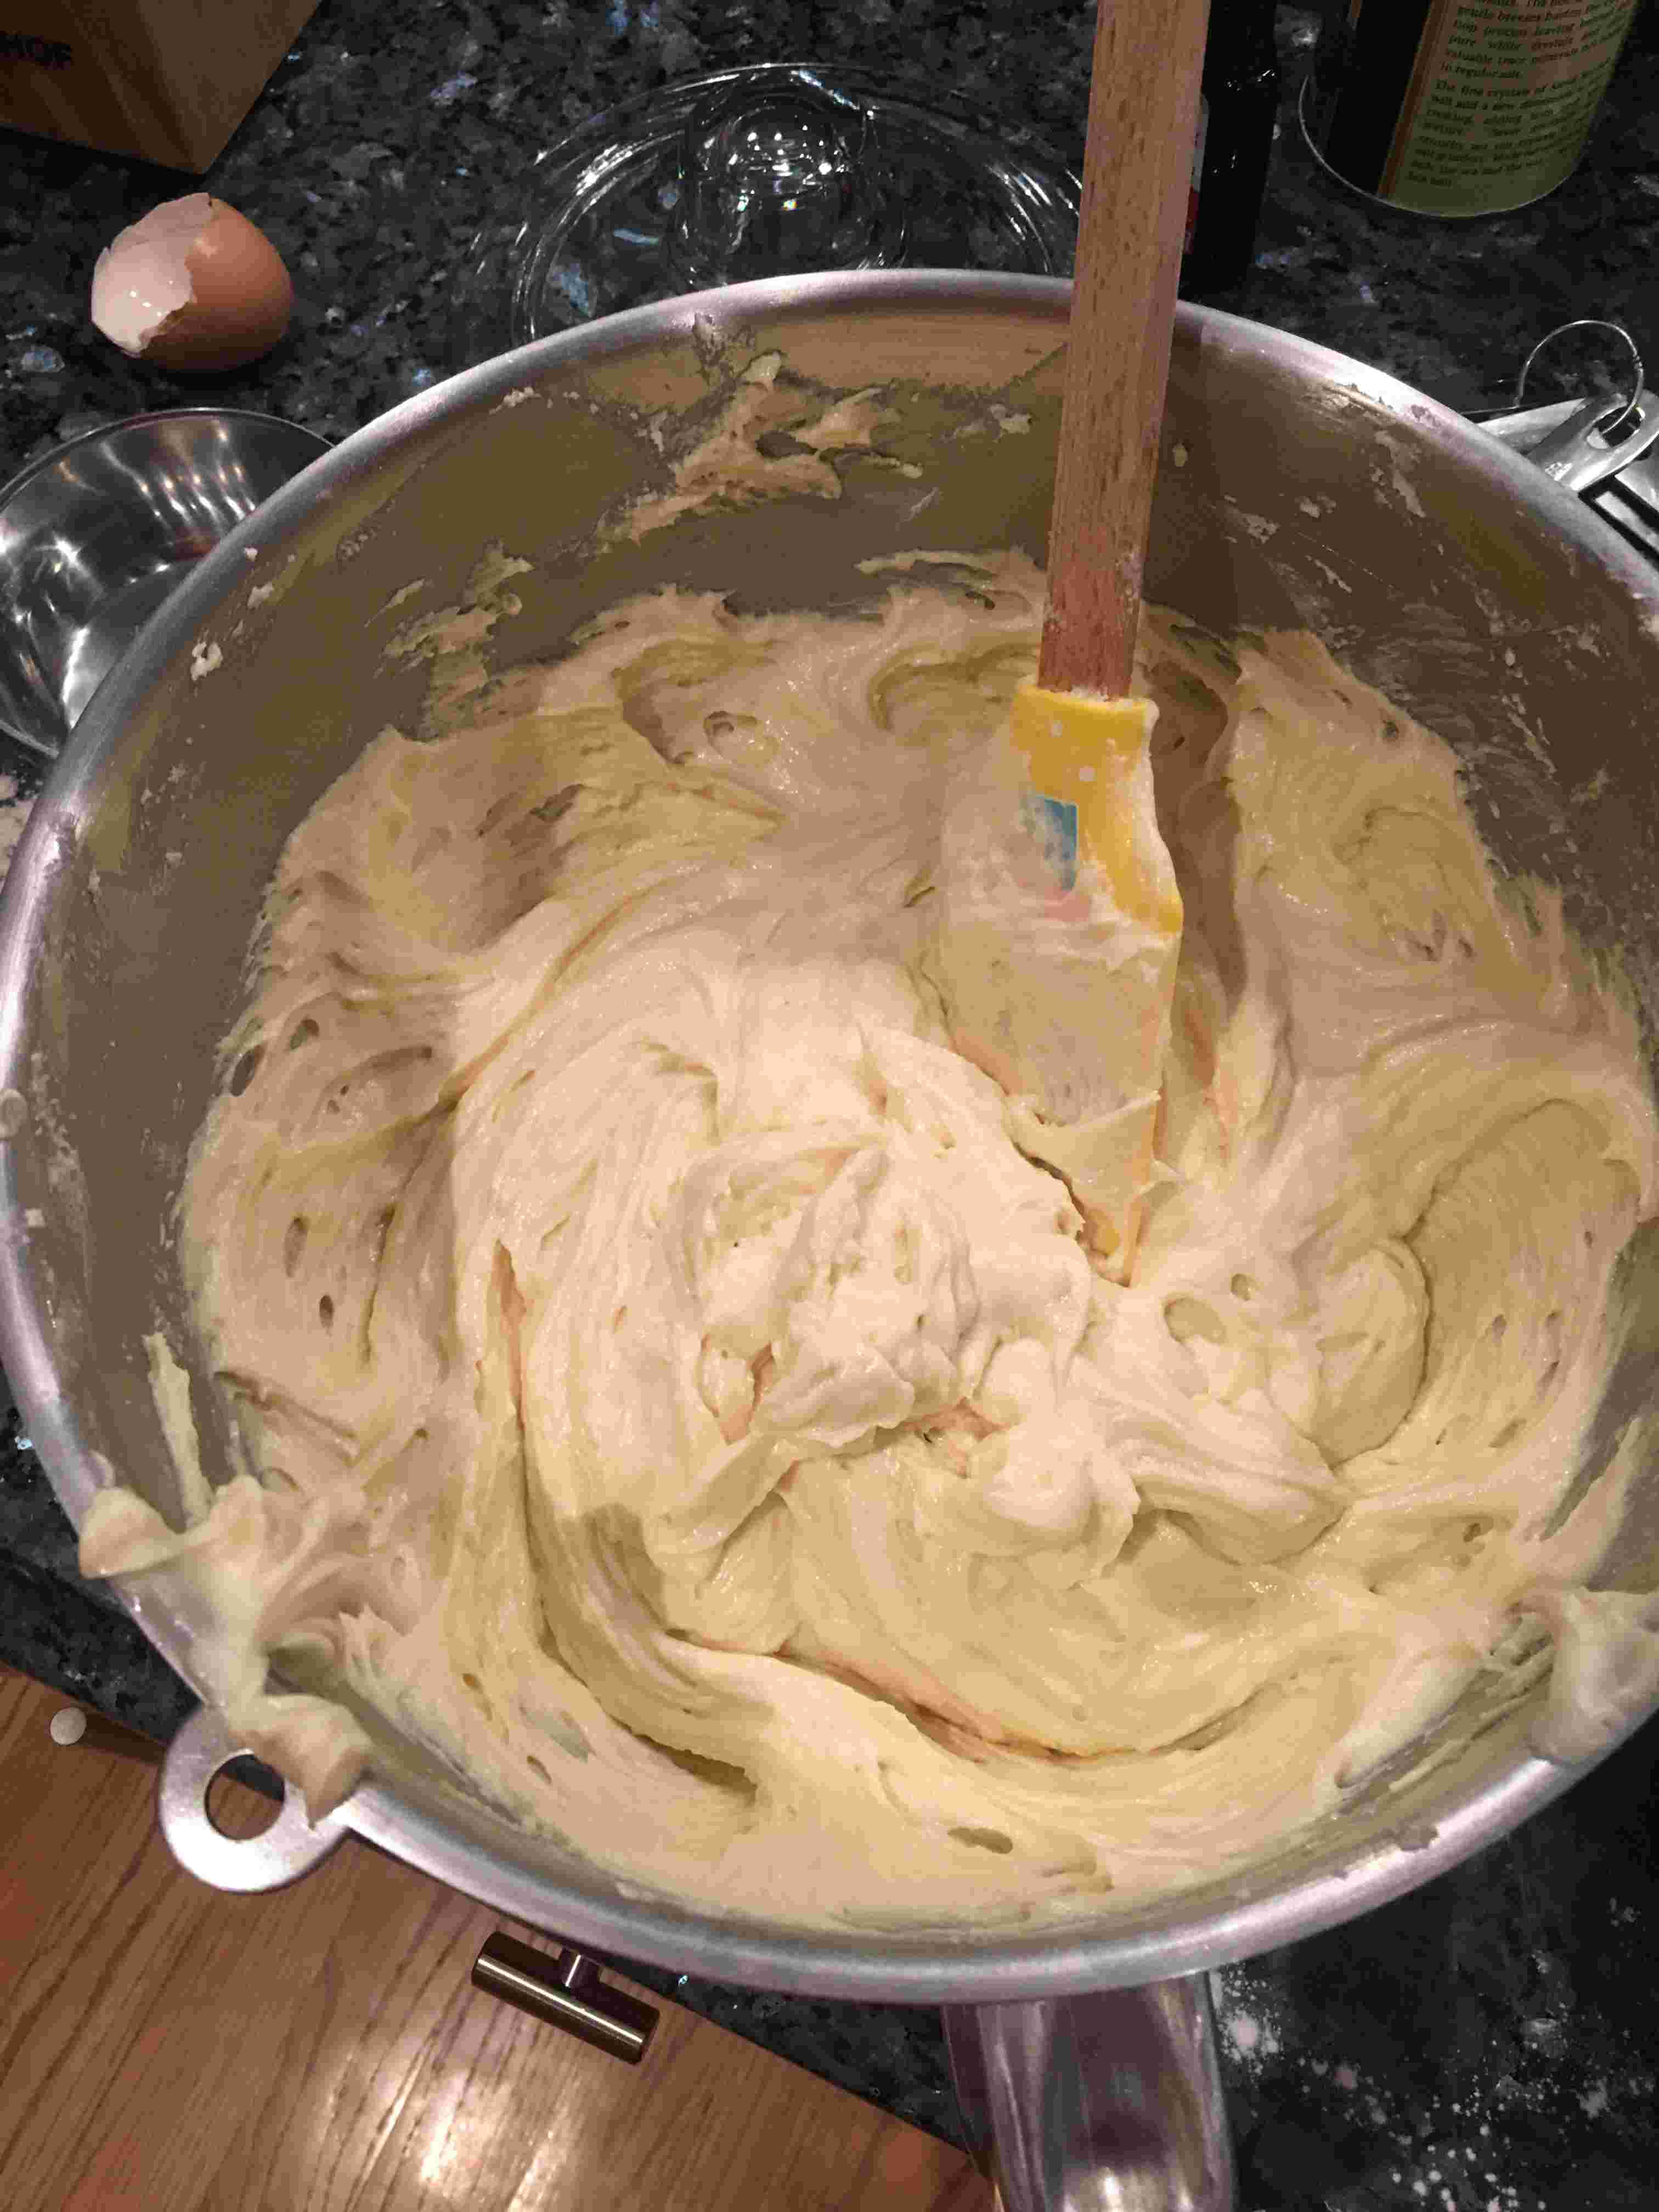 Cake batter after all ingredients have been added